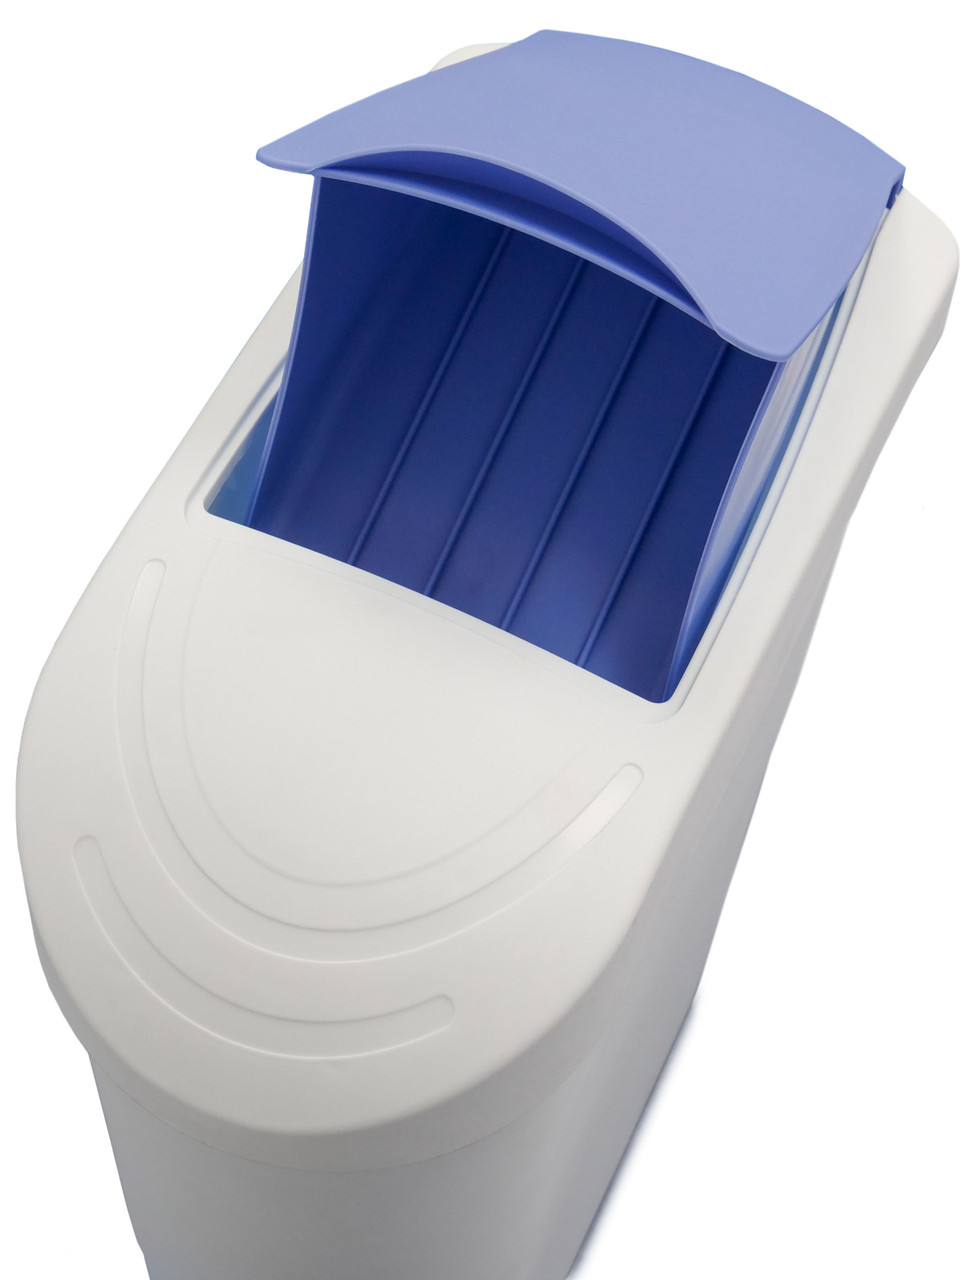 WR-FQ-1003 - Pedal Operated Sanitary Bin - 20 Ltr - White/Blue - Waste Chute Open